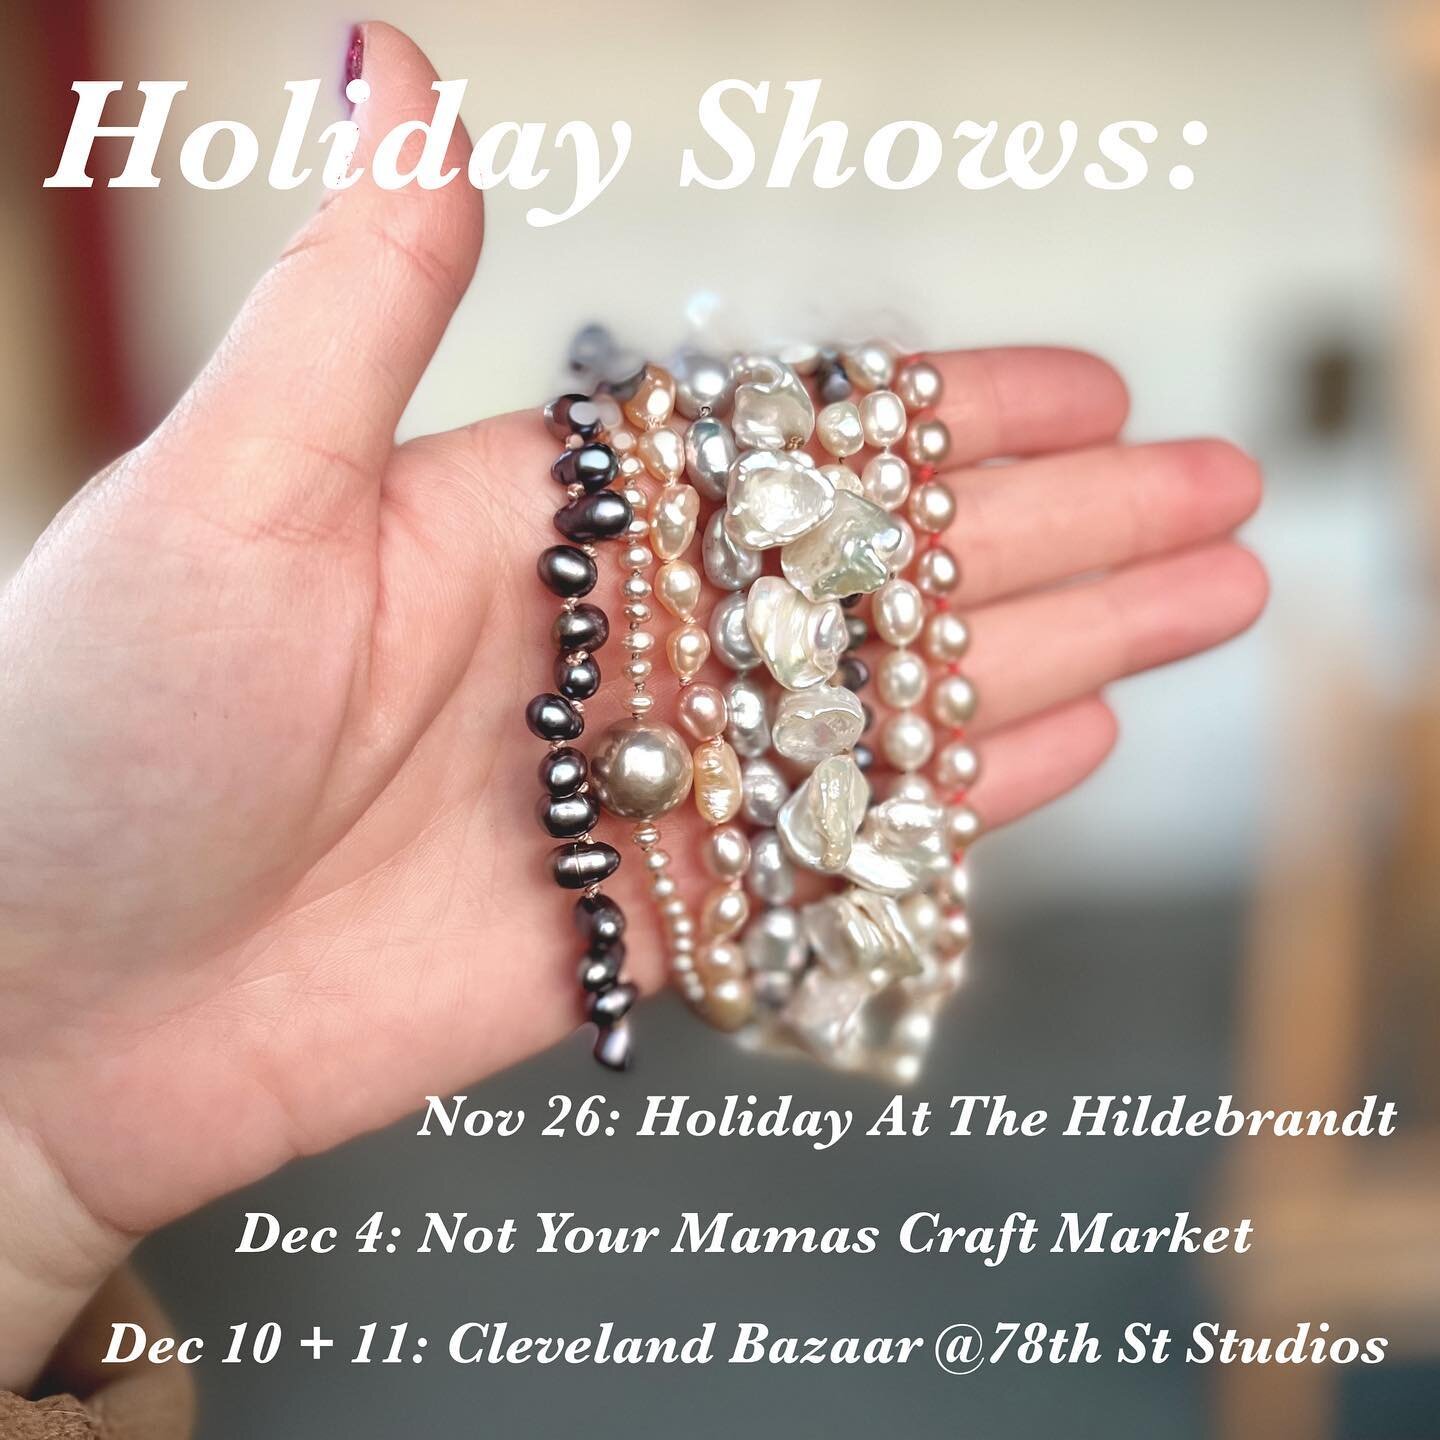 Kicking off my holiday season this weekend at my studio (@hildebrandtartistcollective), plus two shows in Columbus and Cleveland, respectively. I&rsquo;ll be bringing some pieces not on the site, and it&rsquo;s always great to see jewelry in person! 